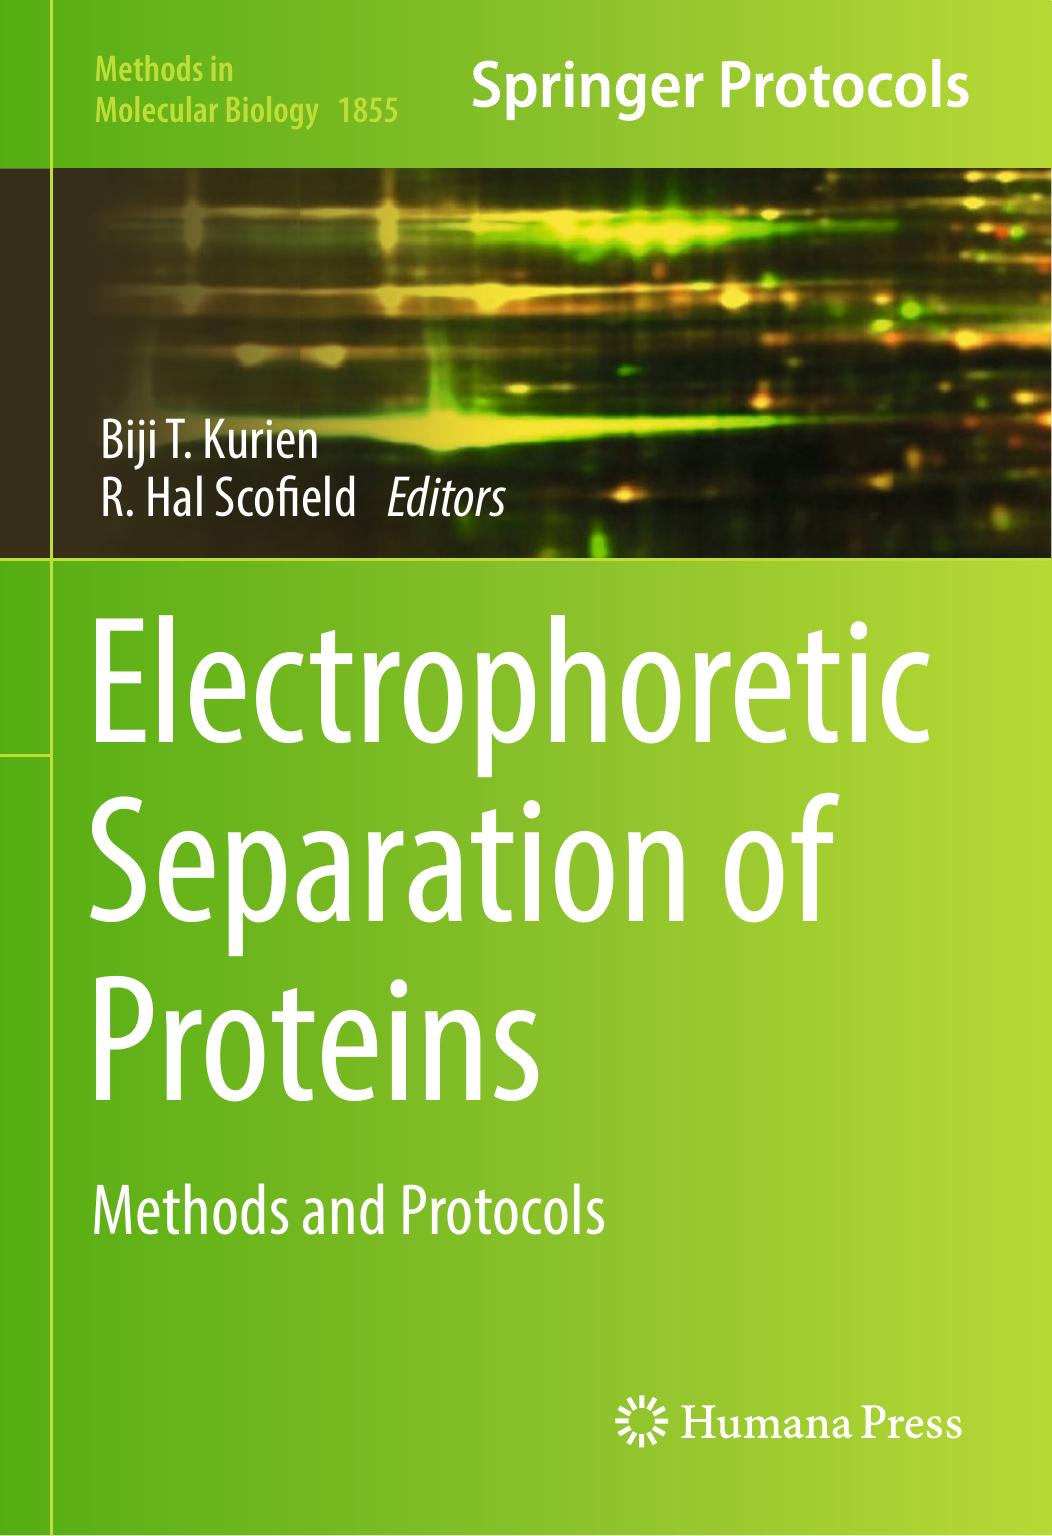 Electrophoretic Separation of Proteins Methods and Protocols 2019